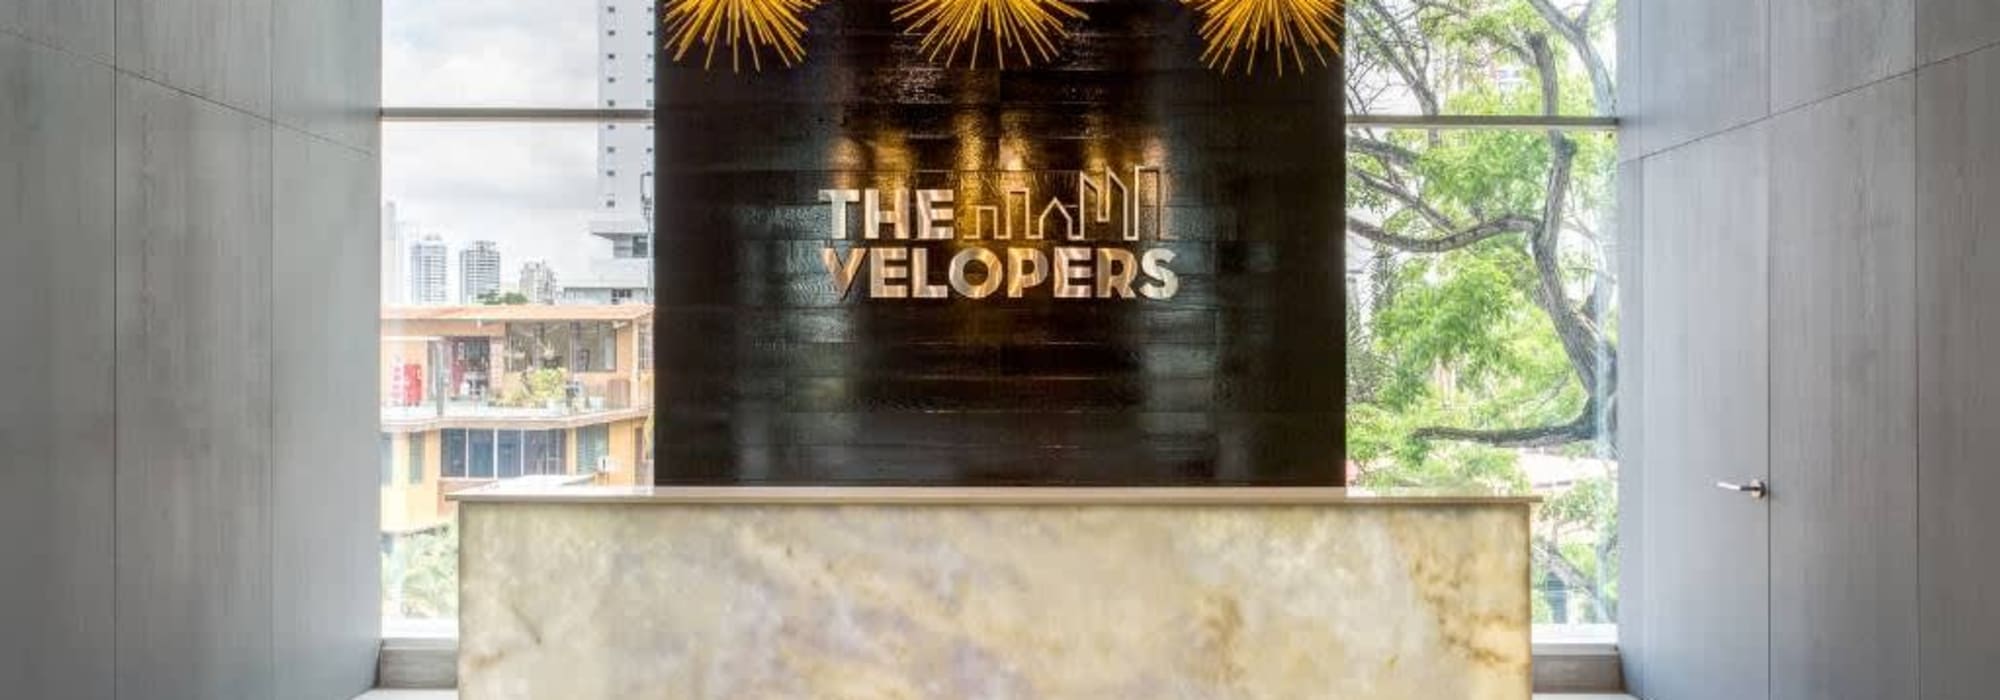 The Velopers